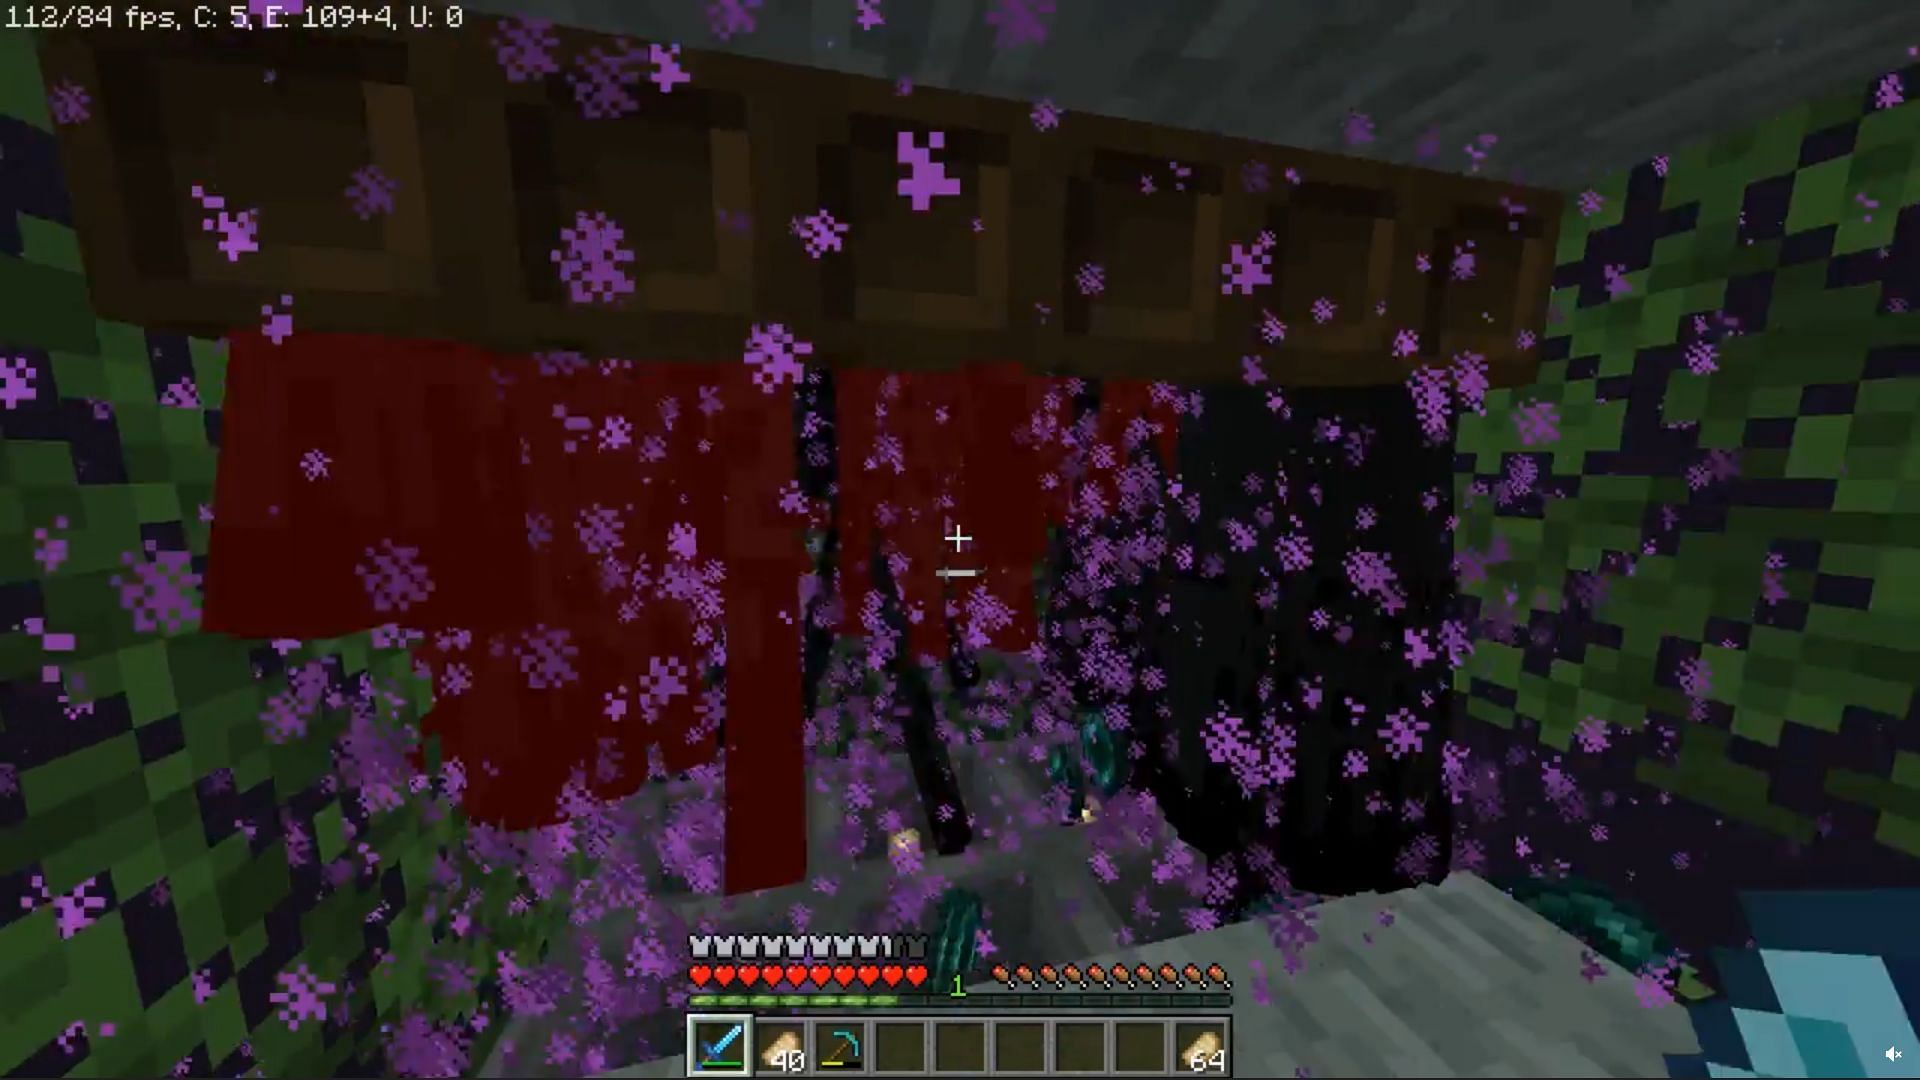 Enderman farm is one of the best to obtain XP in Minecraft (Image via Mojang)